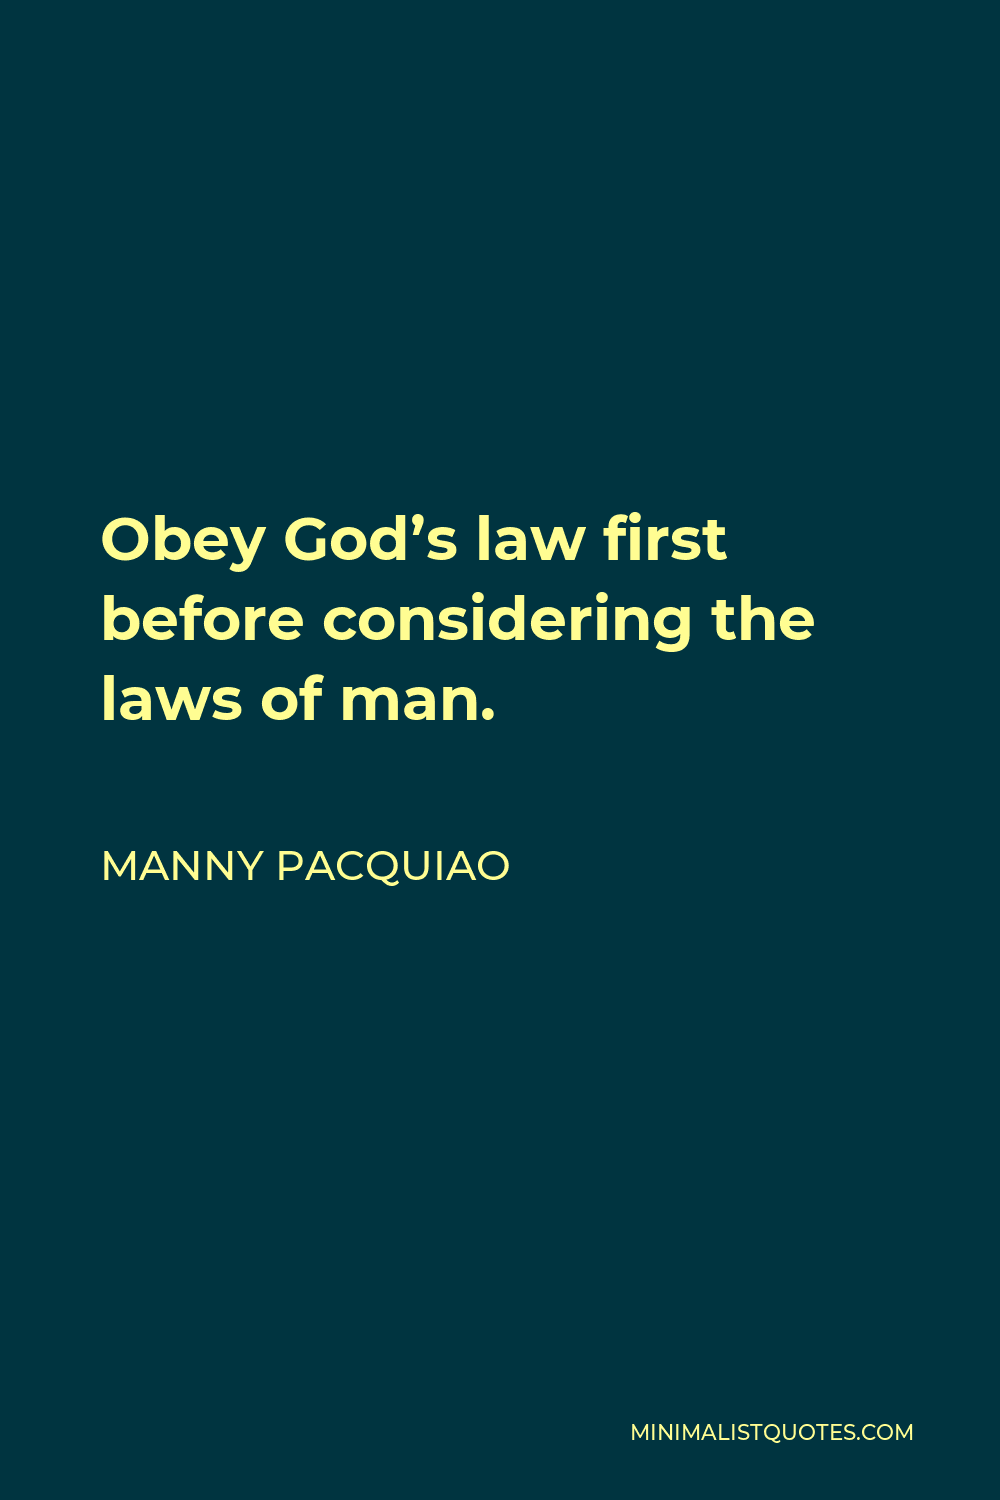 Manny Pacquiao Quote - Obey God’s law first before considering the laws of man.